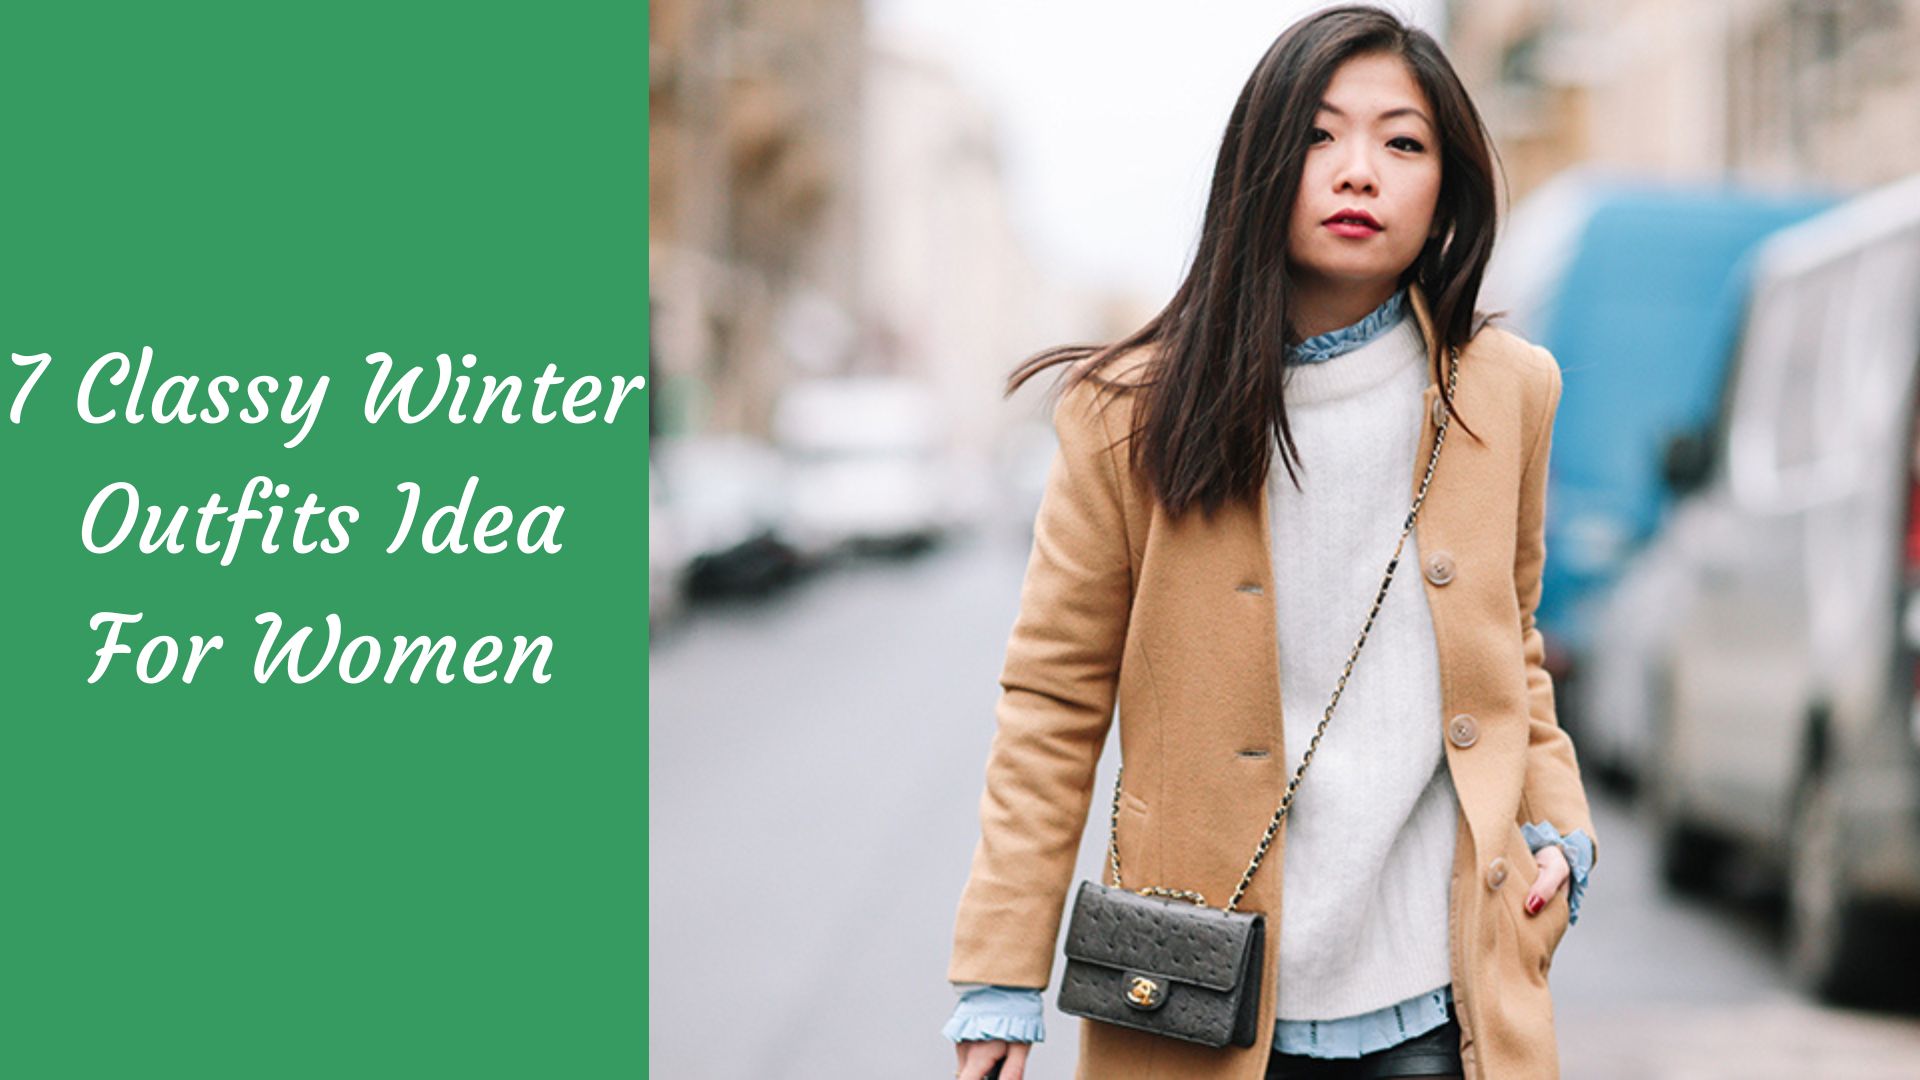 13 Chic Neutral Winter Outfits We're Wearing This Season